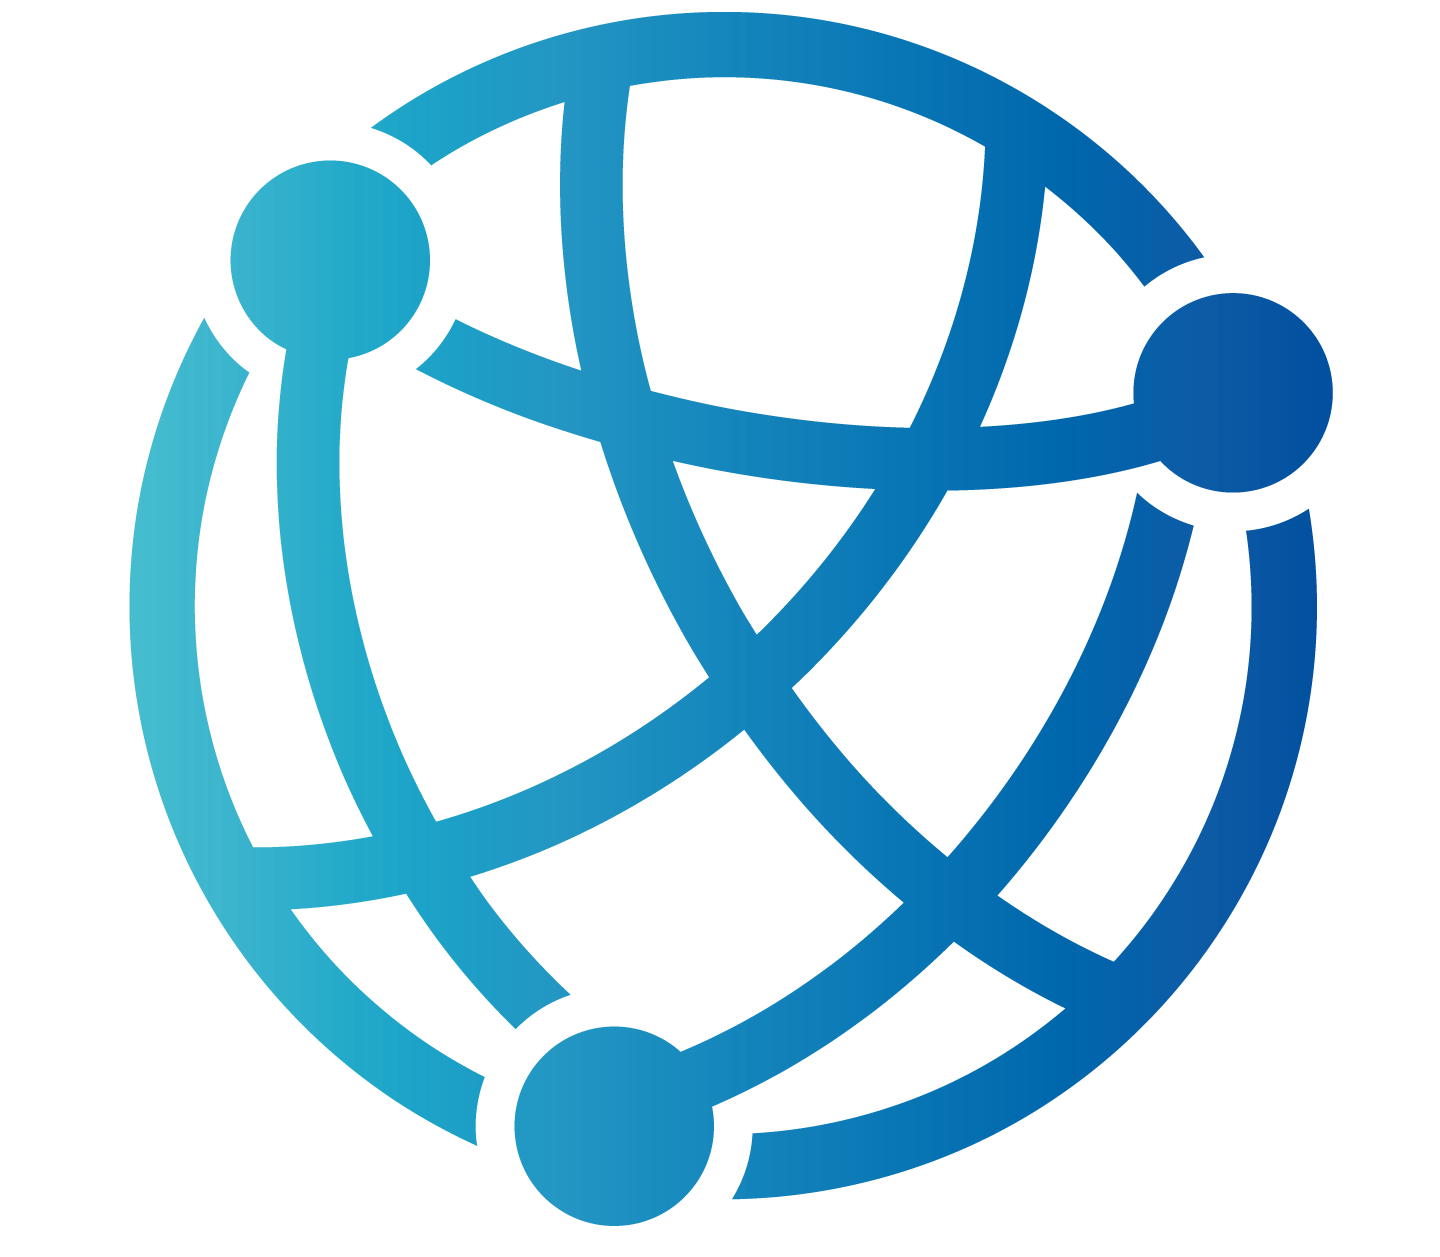 Network icon from Liberty Global icon set